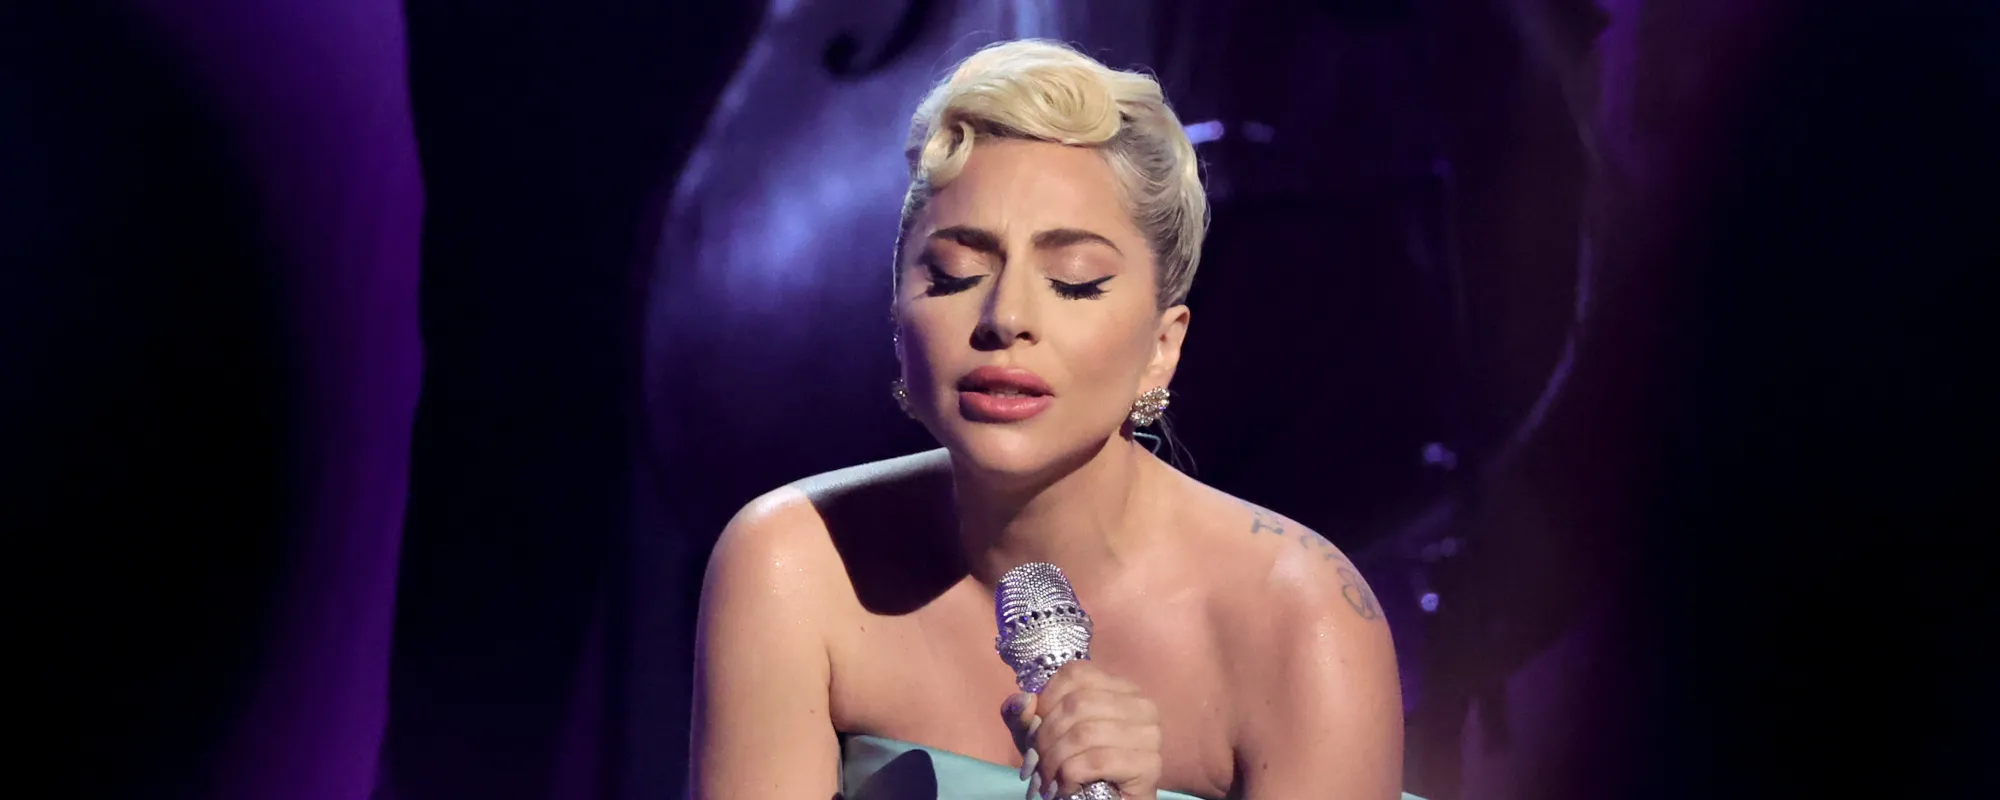 3 Songs for People Who Say They Don’t Like Lady Gaga